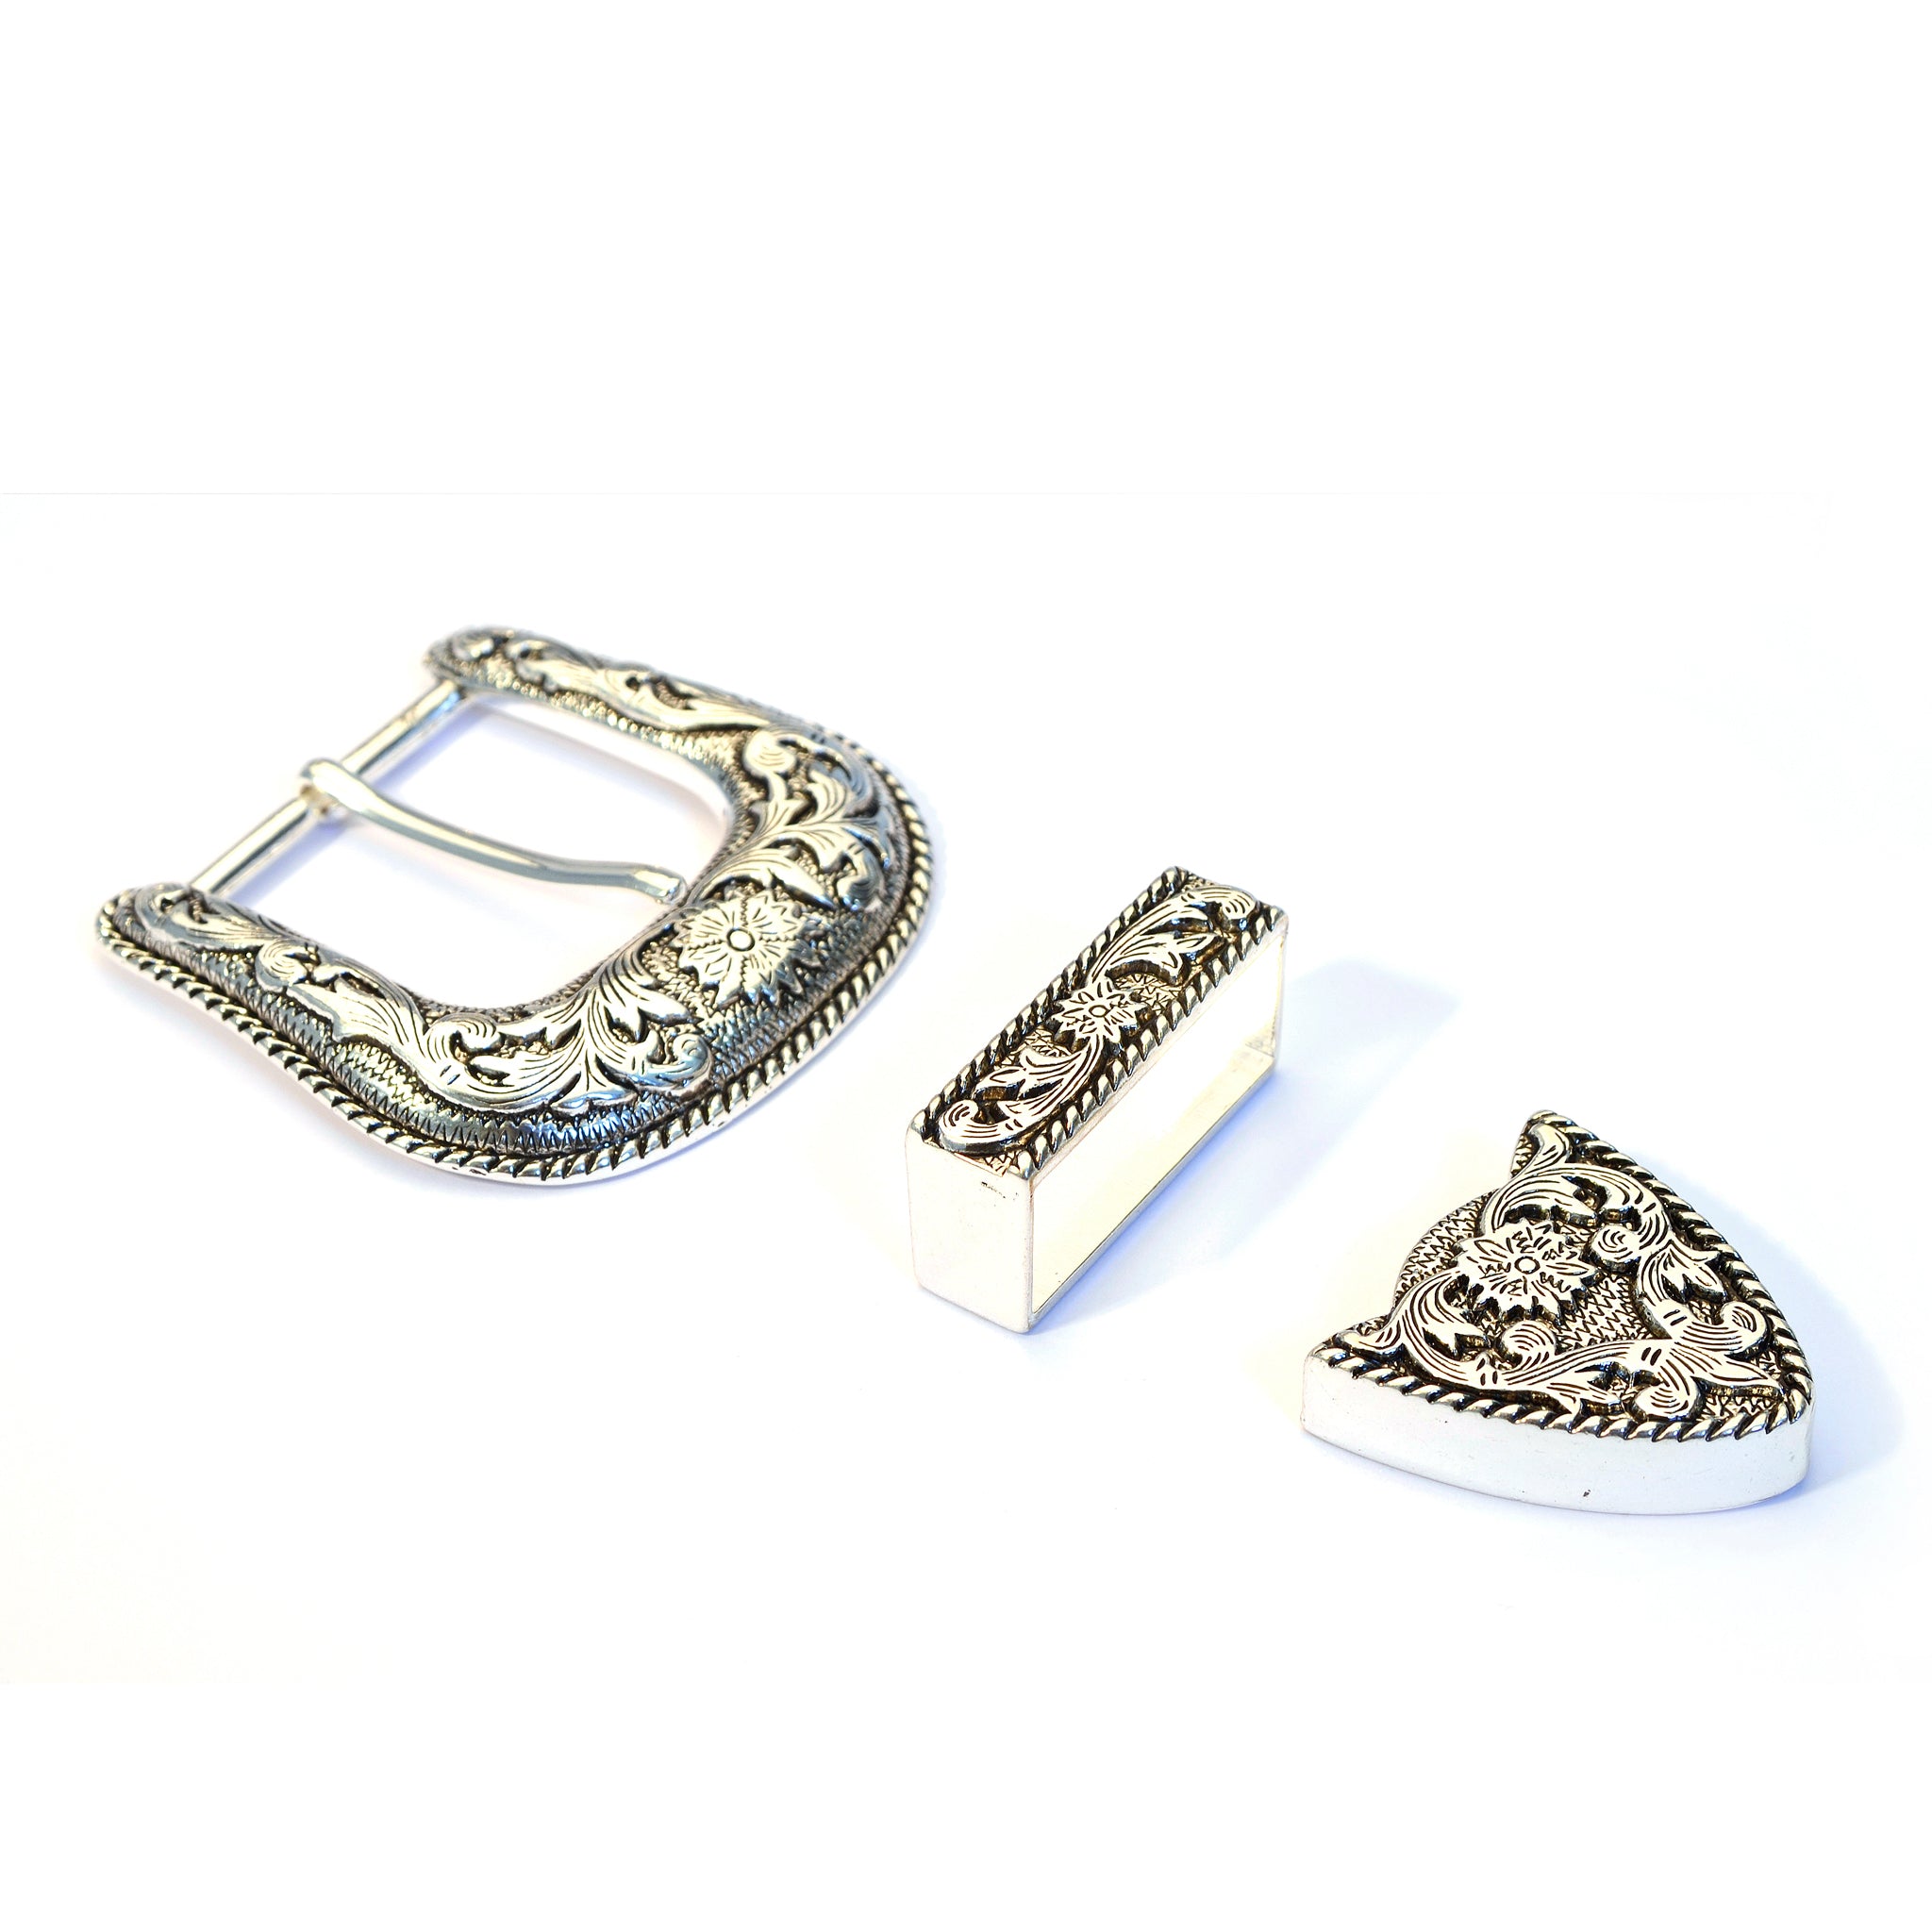 Victoria Engraved Buckle Set from Identity Leathercraft 